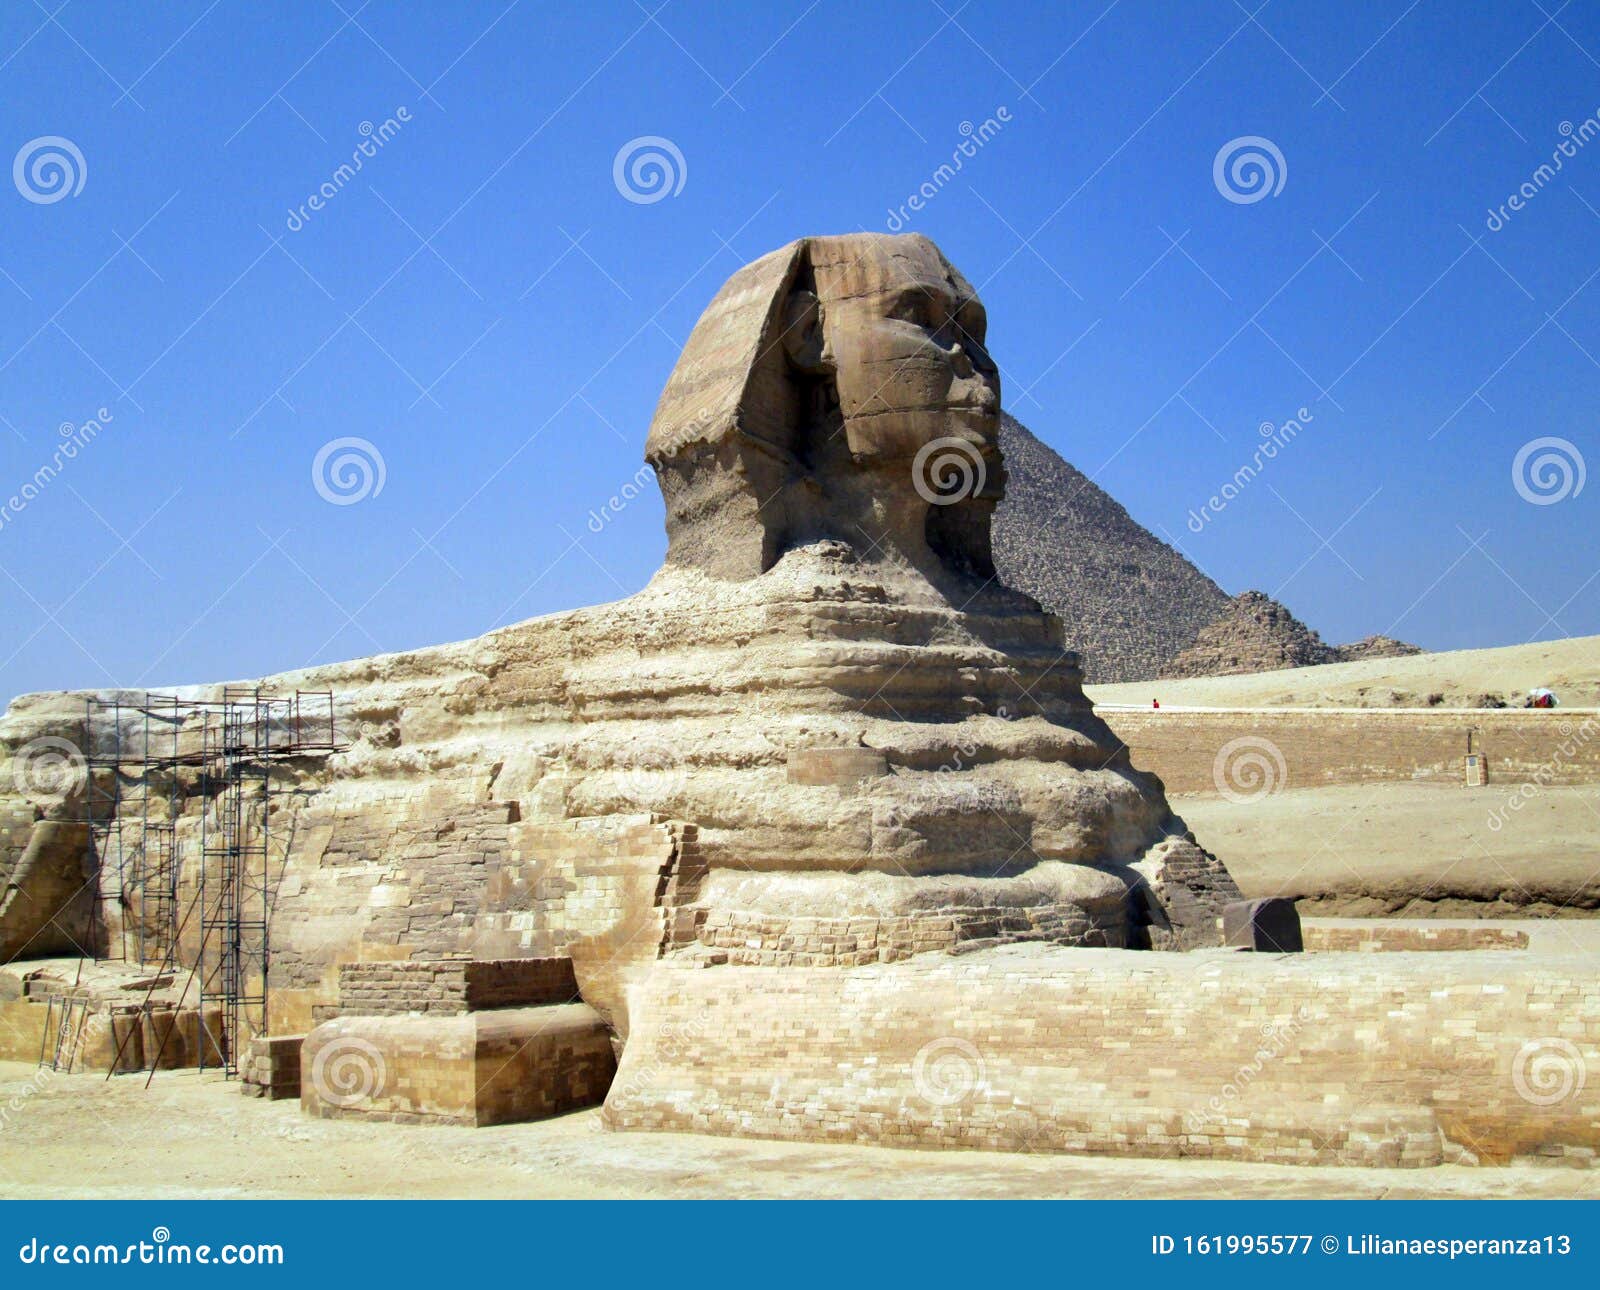 sphinxes of giza egypt africa